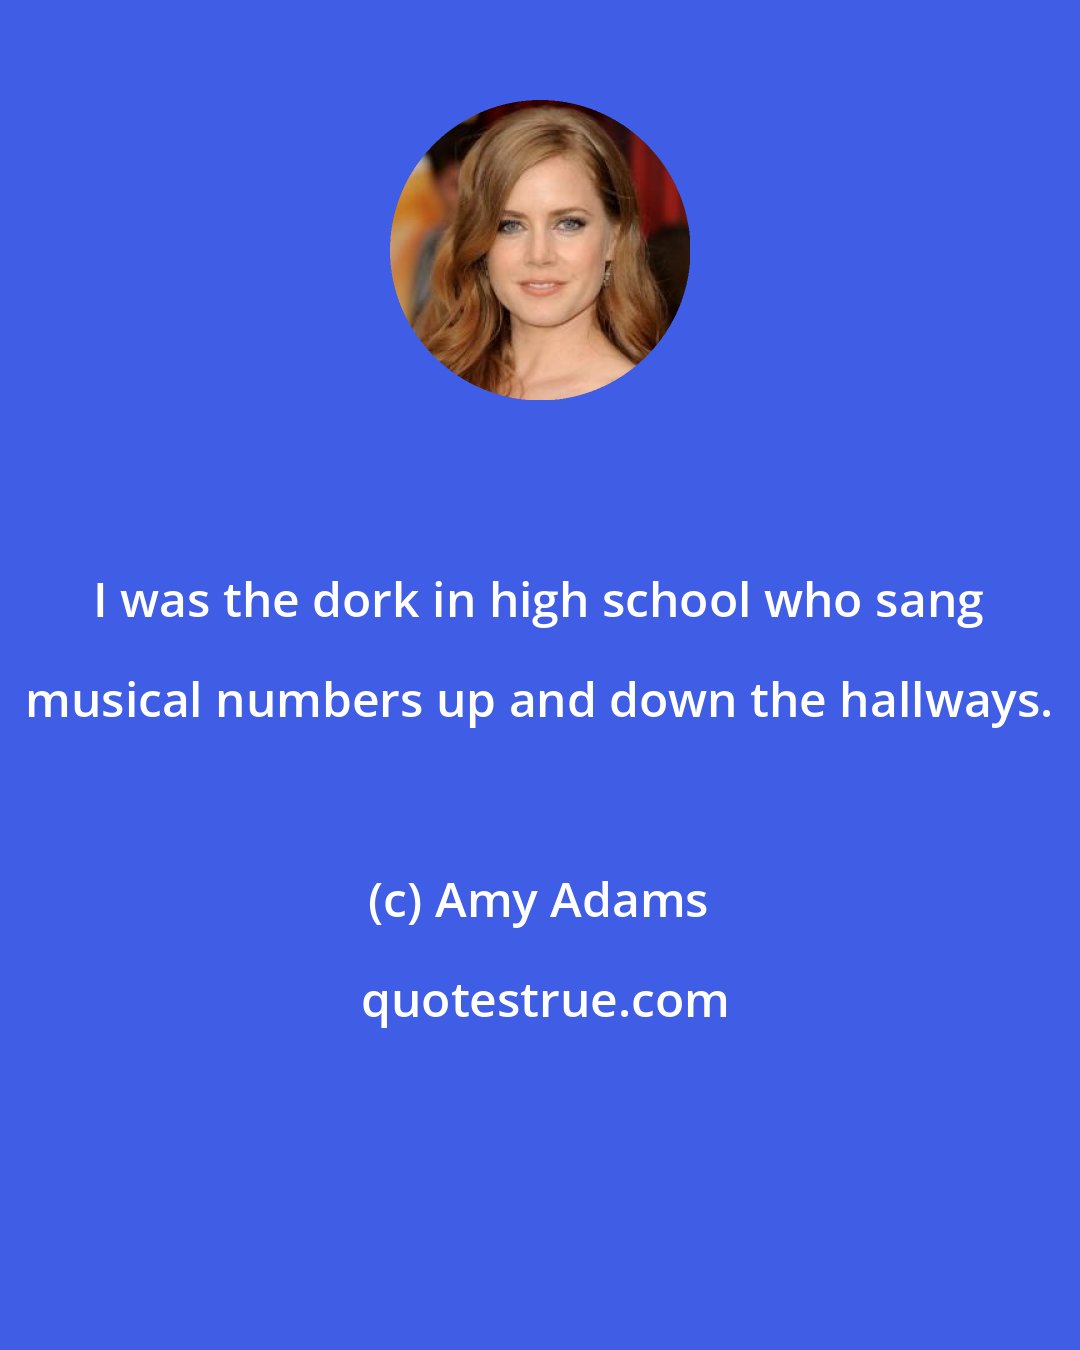 Amy Adams: I was the dork in high school who sang musical numbers up and down the hallways.